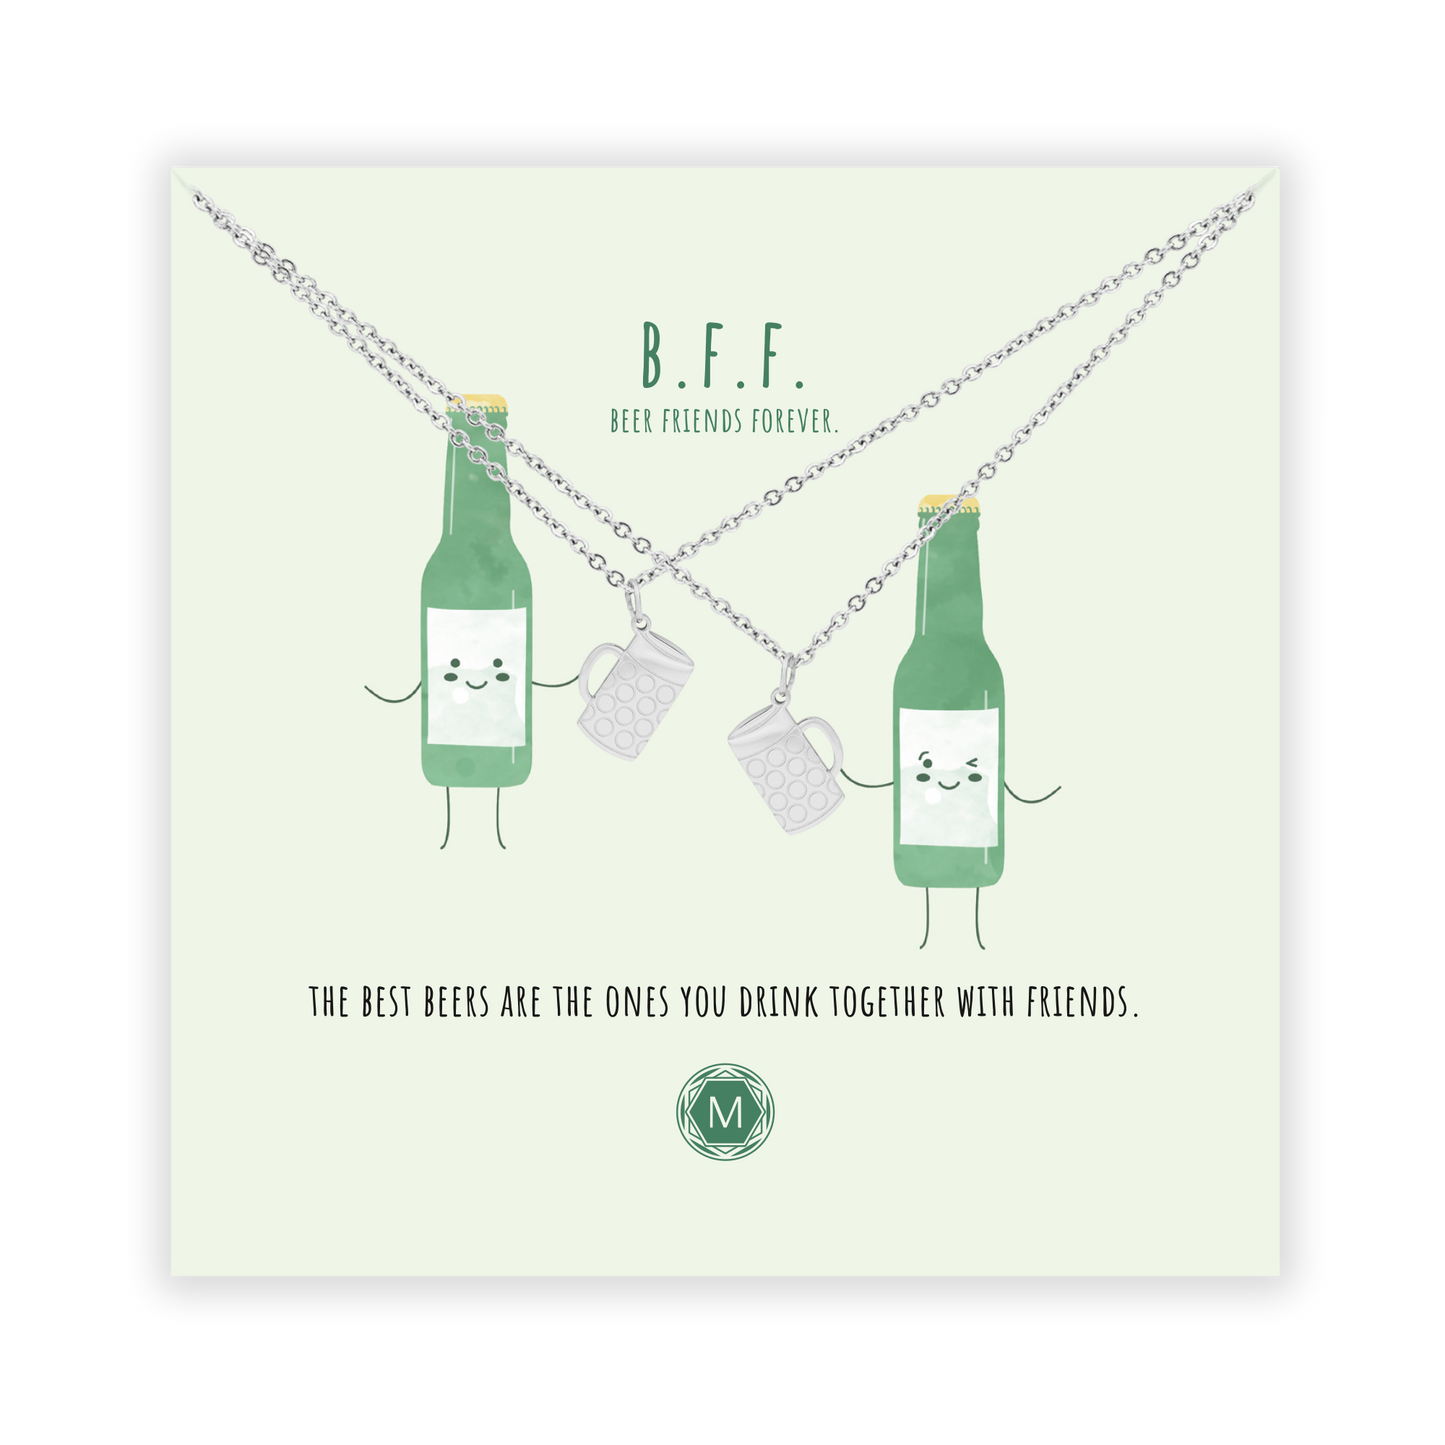 B.F.F. BEER FRIENDS FOREVER 2x Collana